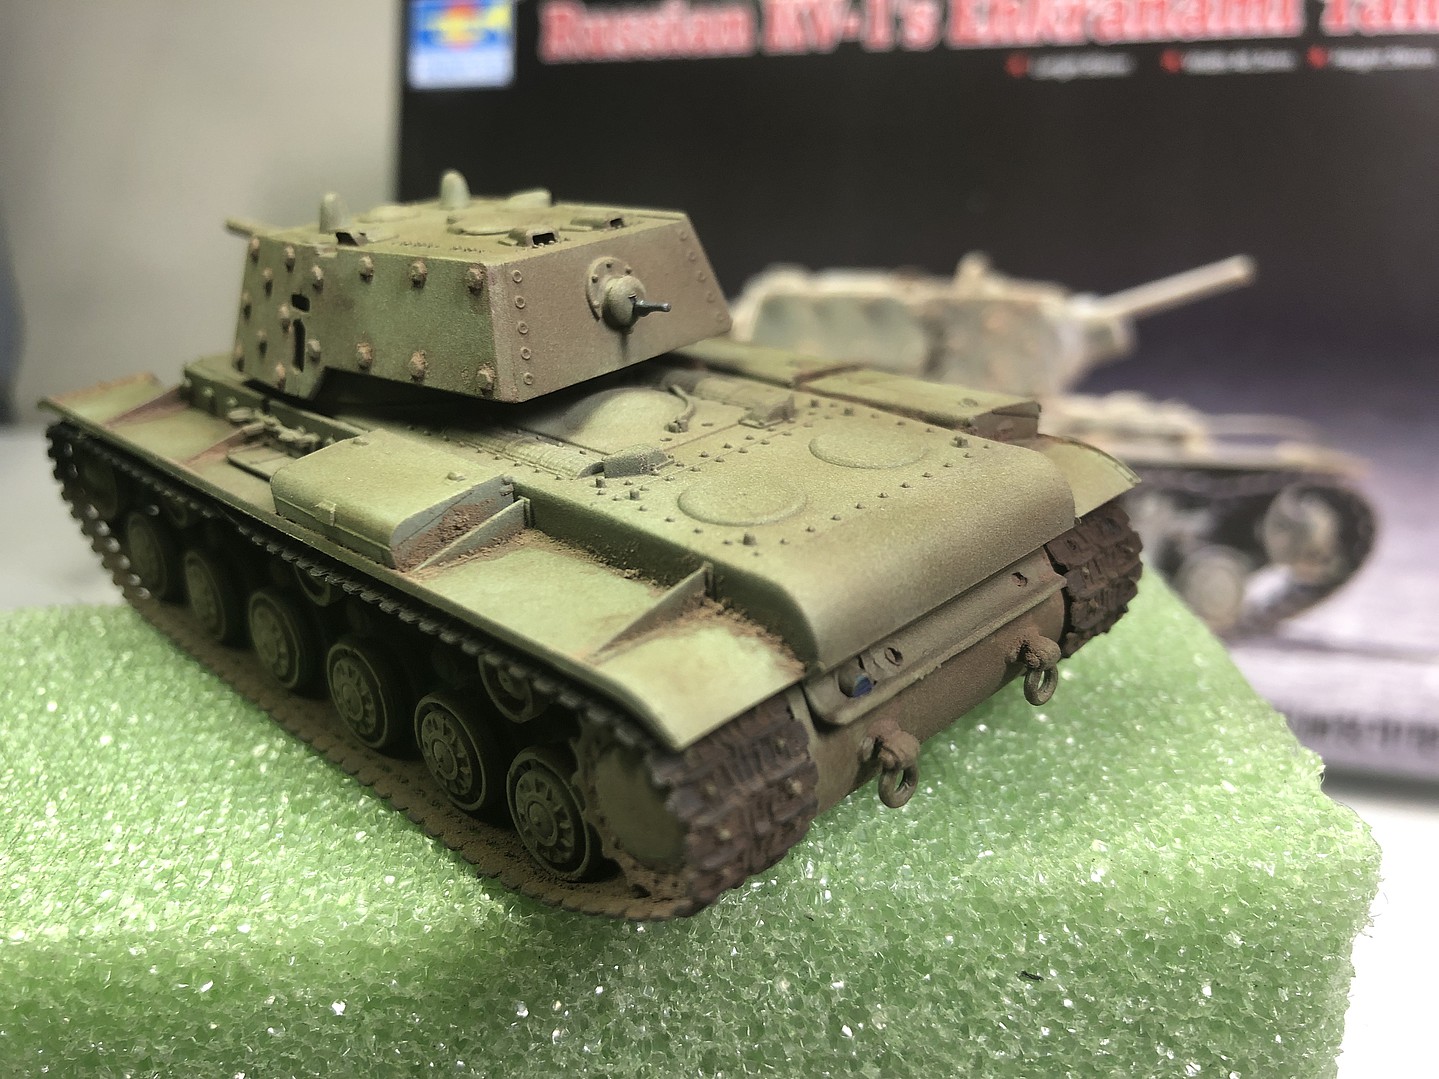 Details about  / 1//72 Model 07230 Trumpeter Car Russian KV-1s Ehkranami Armored Tank Plastic